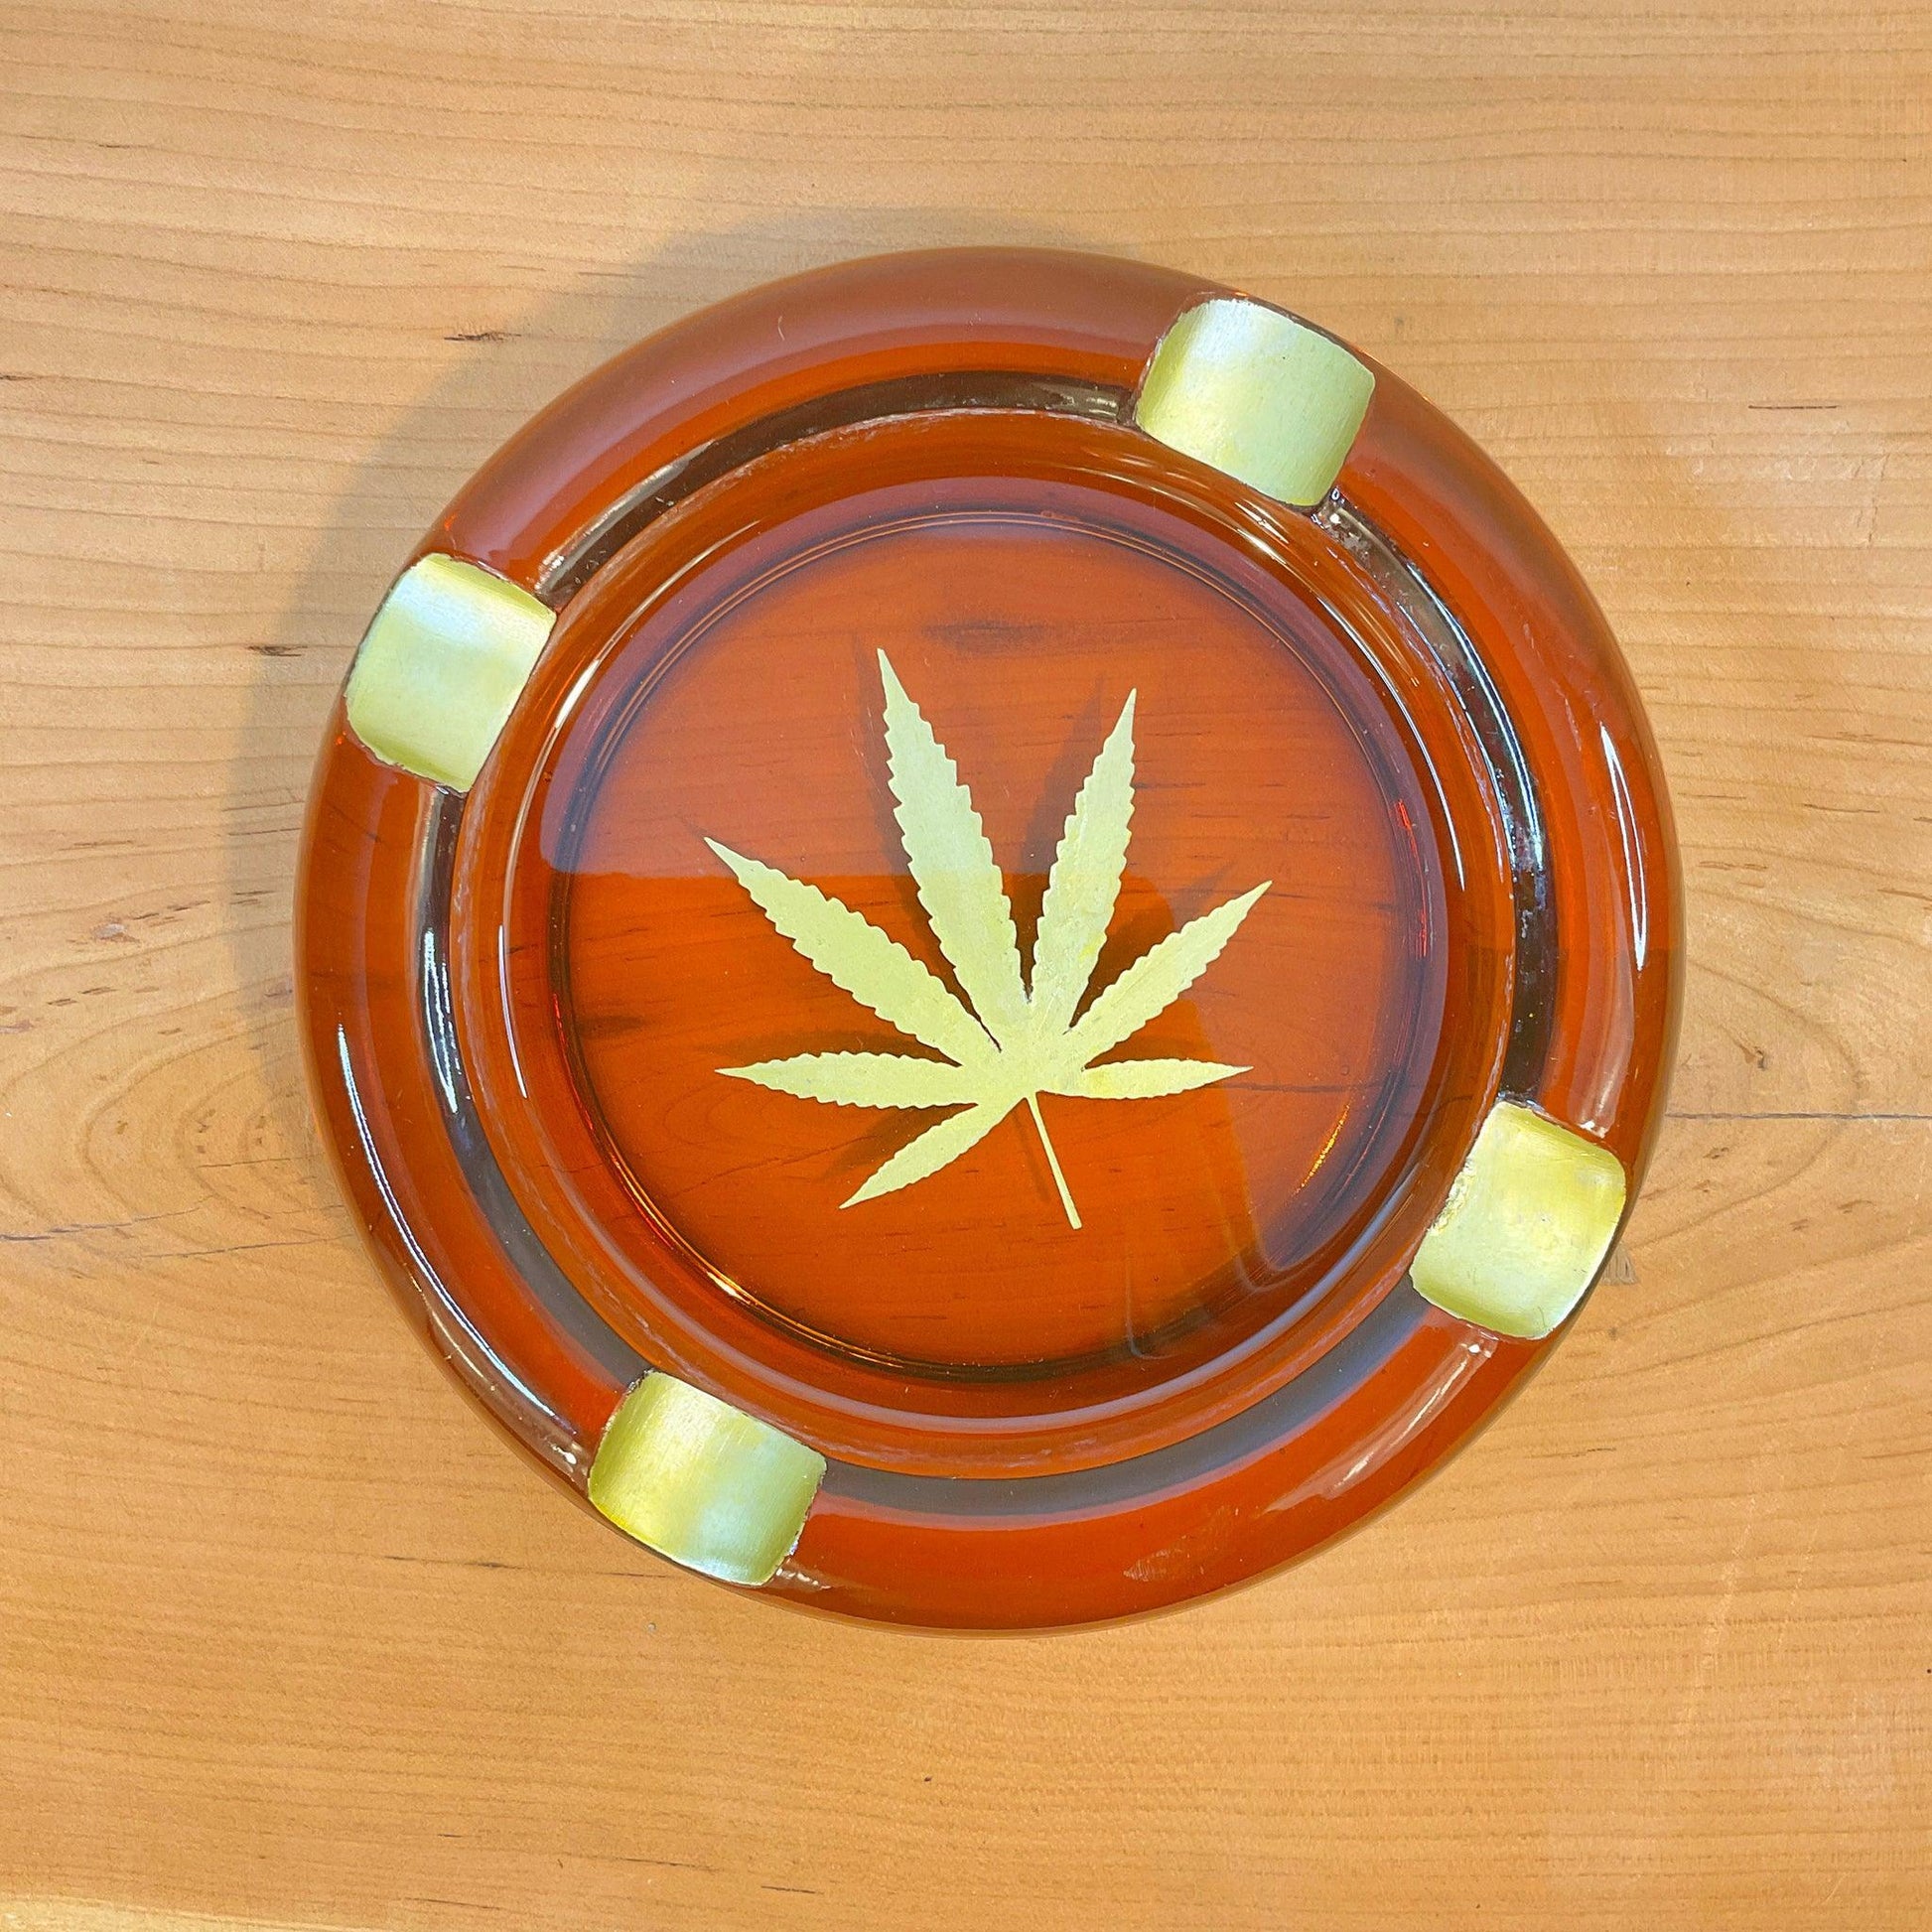 Blunt Ashtray - Offensively Domestic